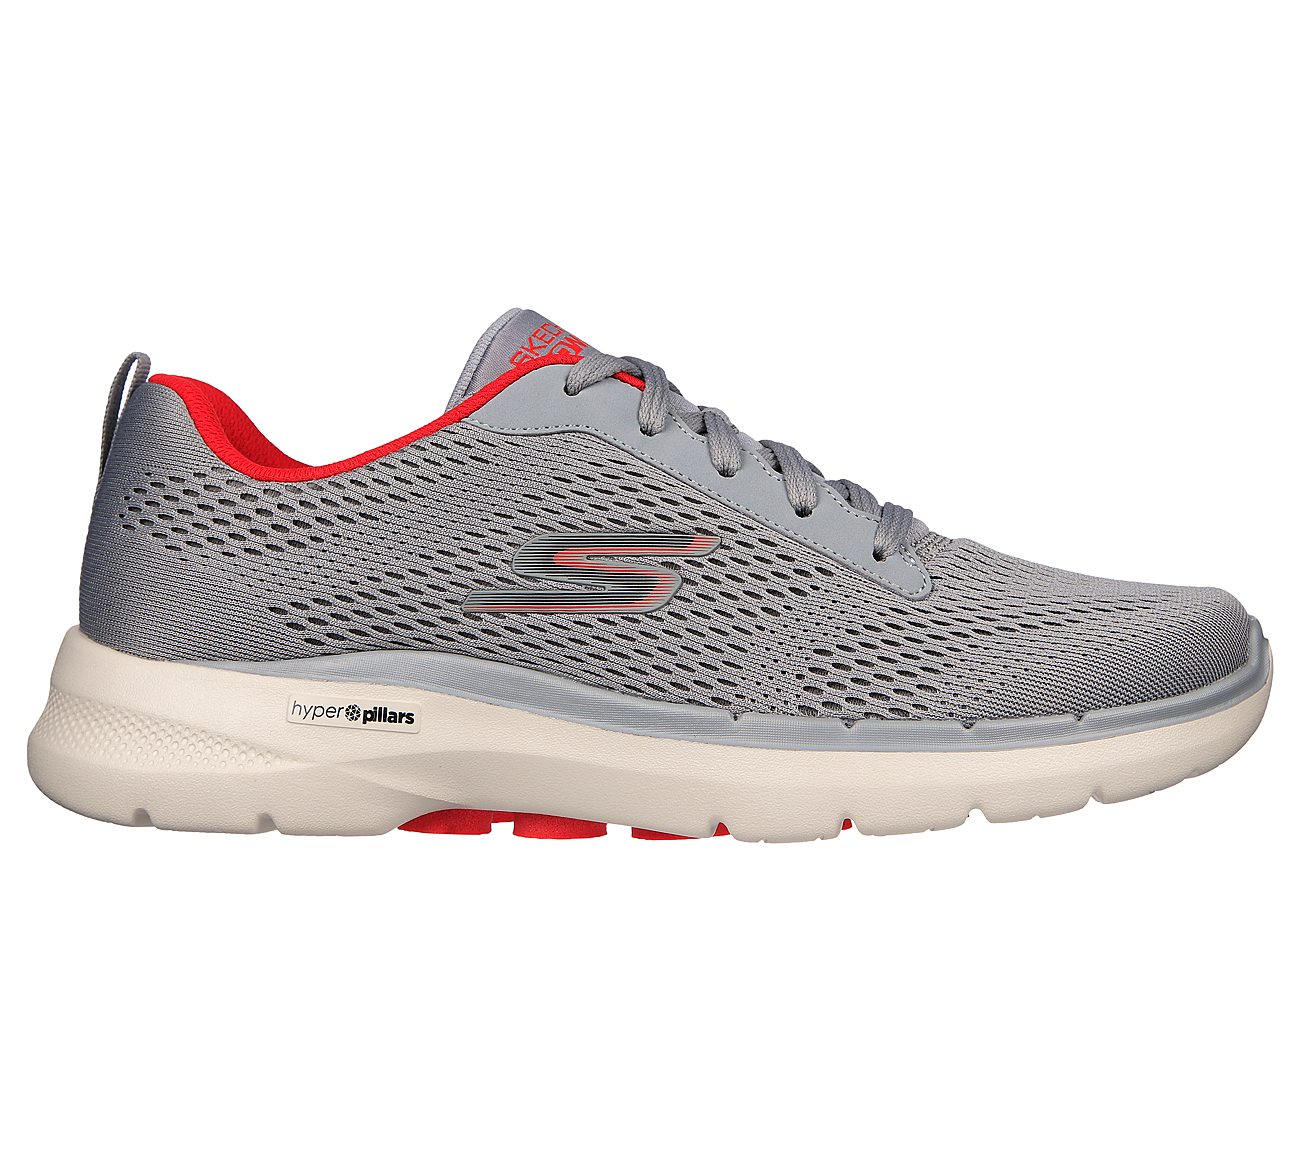 Skechers Grey/Red Go Walk 6 Avalo 2 Mens Lace Up Shoes - Style ID ...